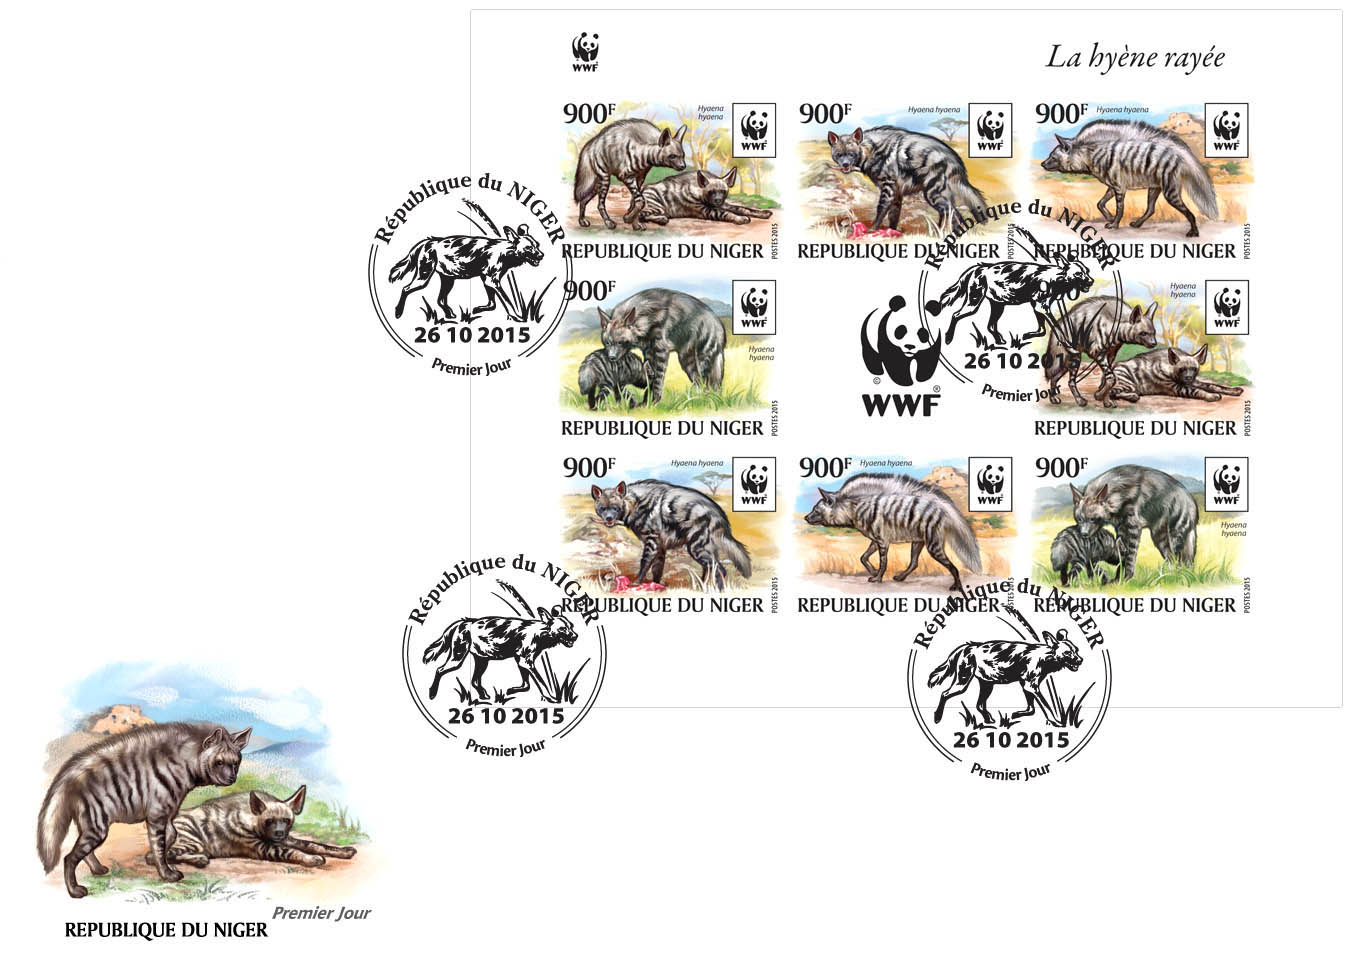 WWF – Hyena (FDC imperf.) - Issue of Niger postage stamps